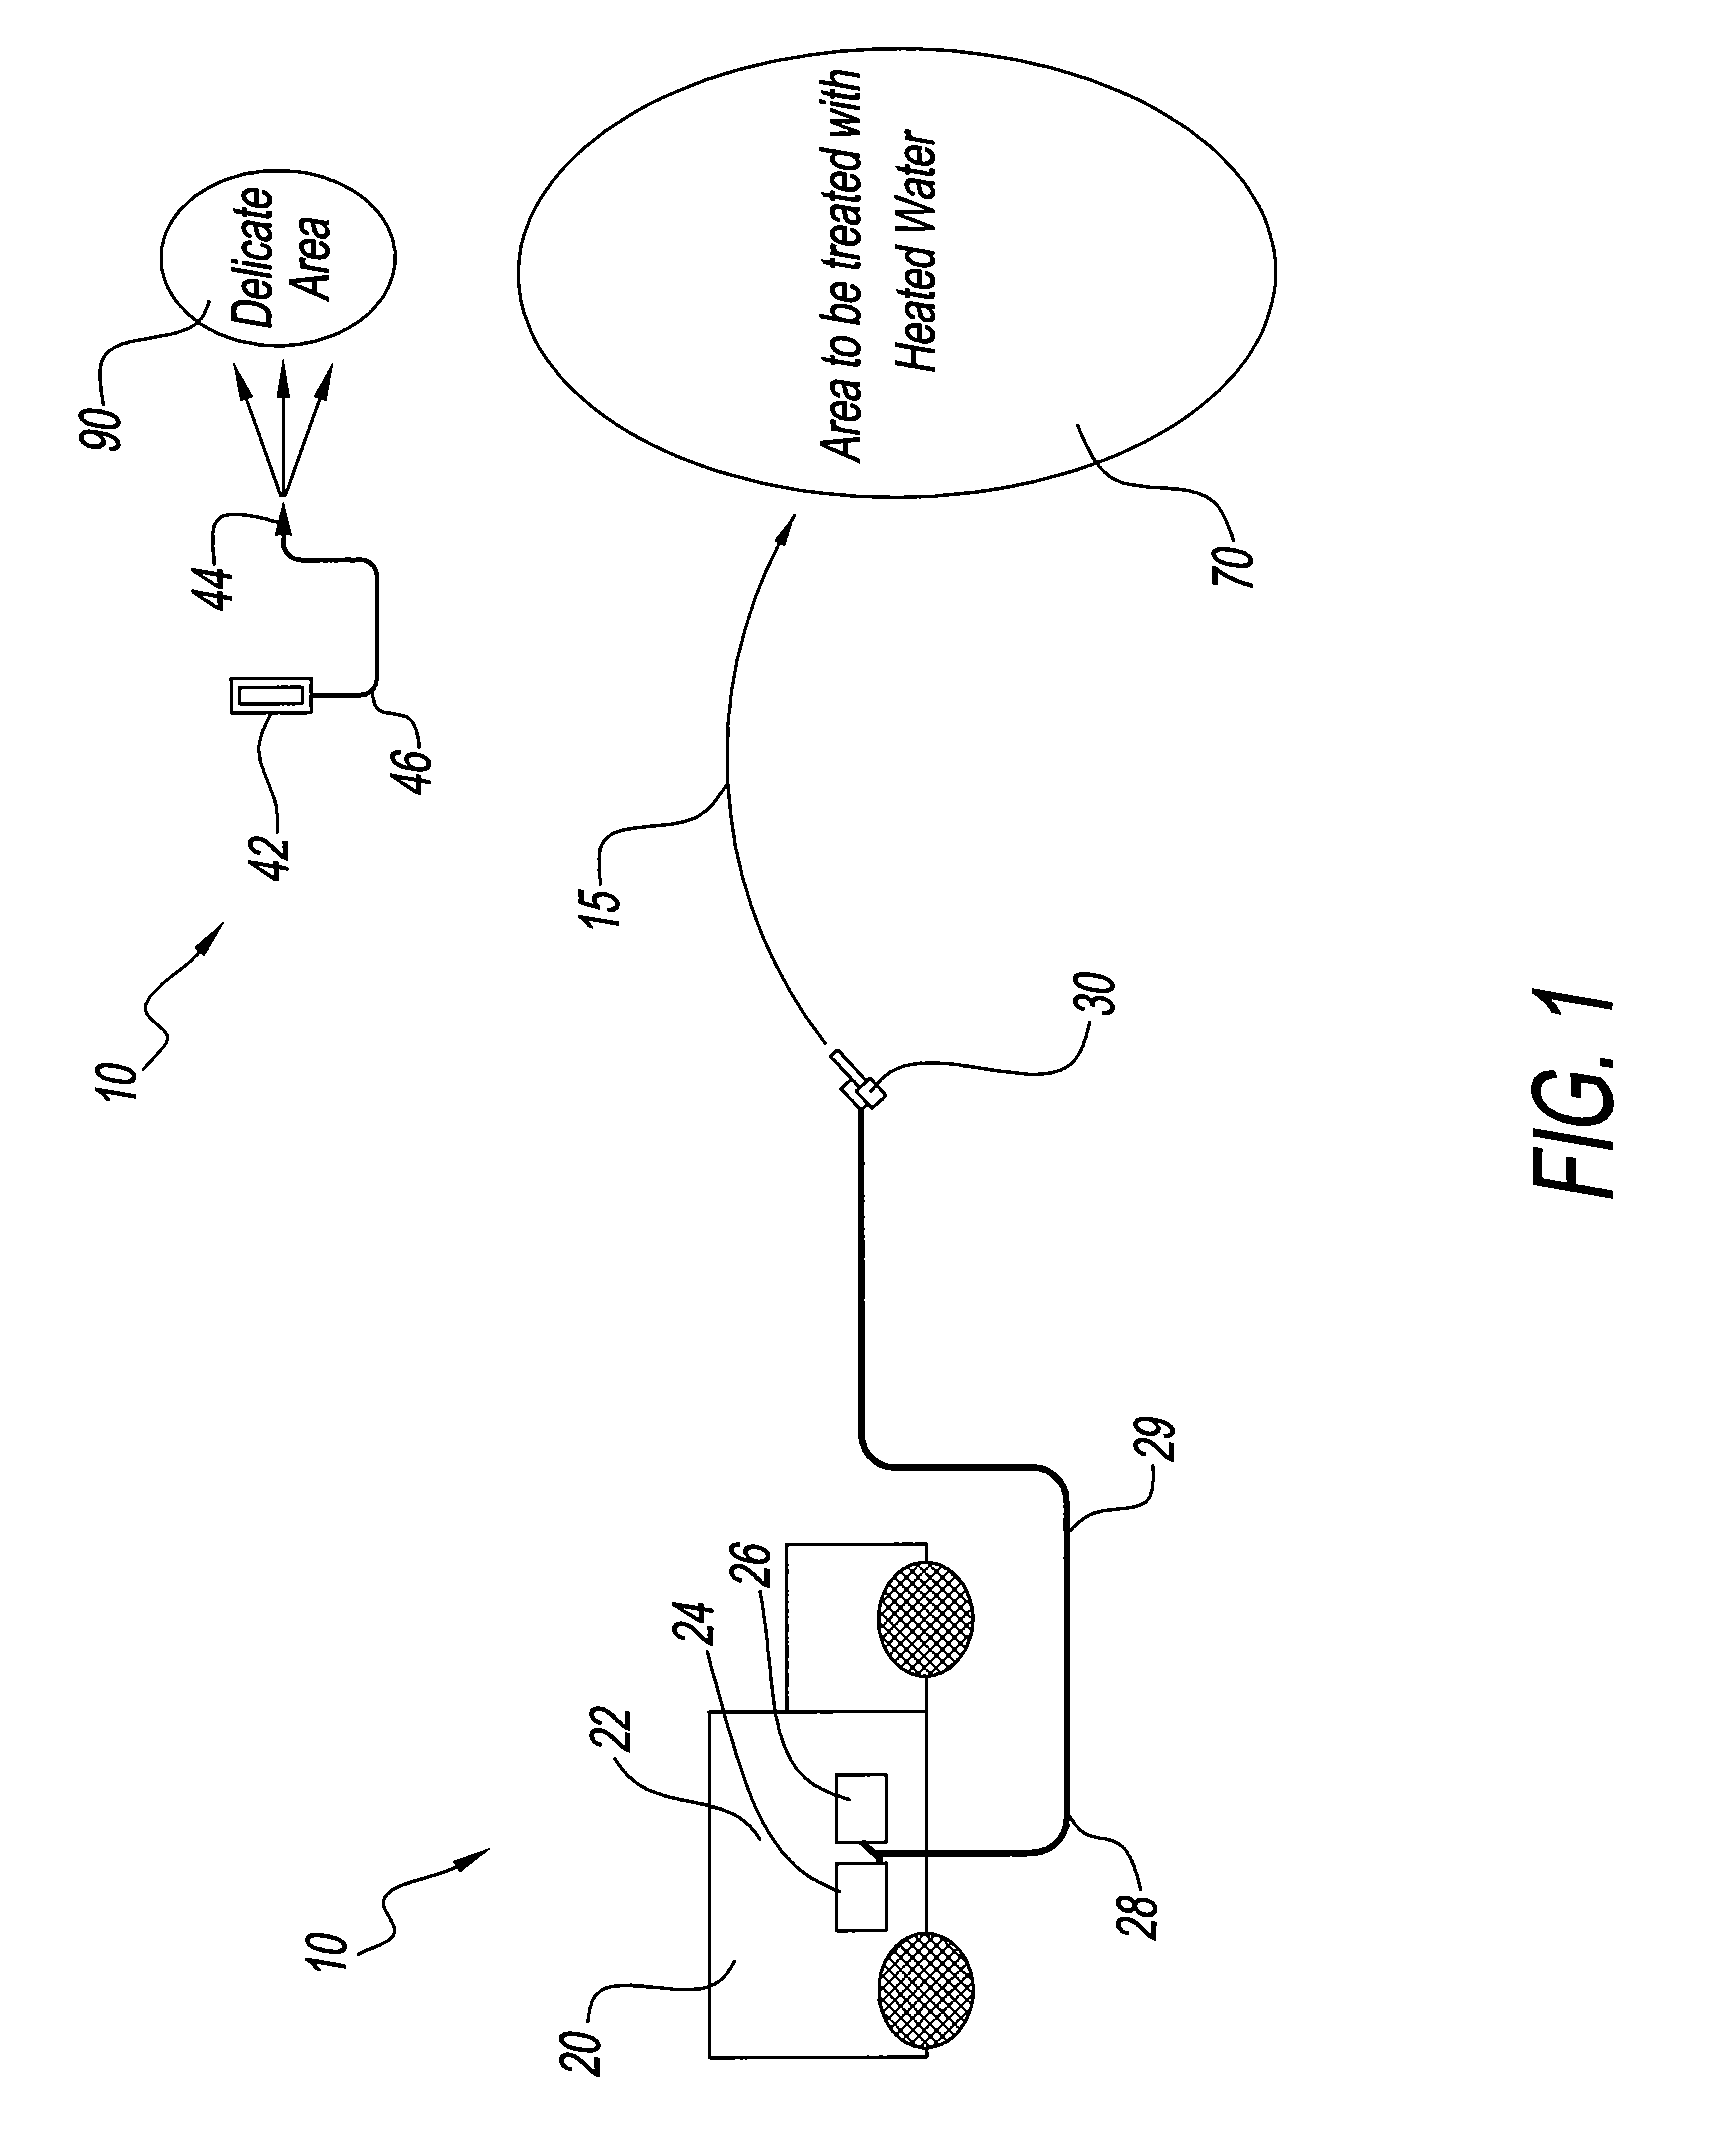 Method for killing ticks and other vectors using a heated water system